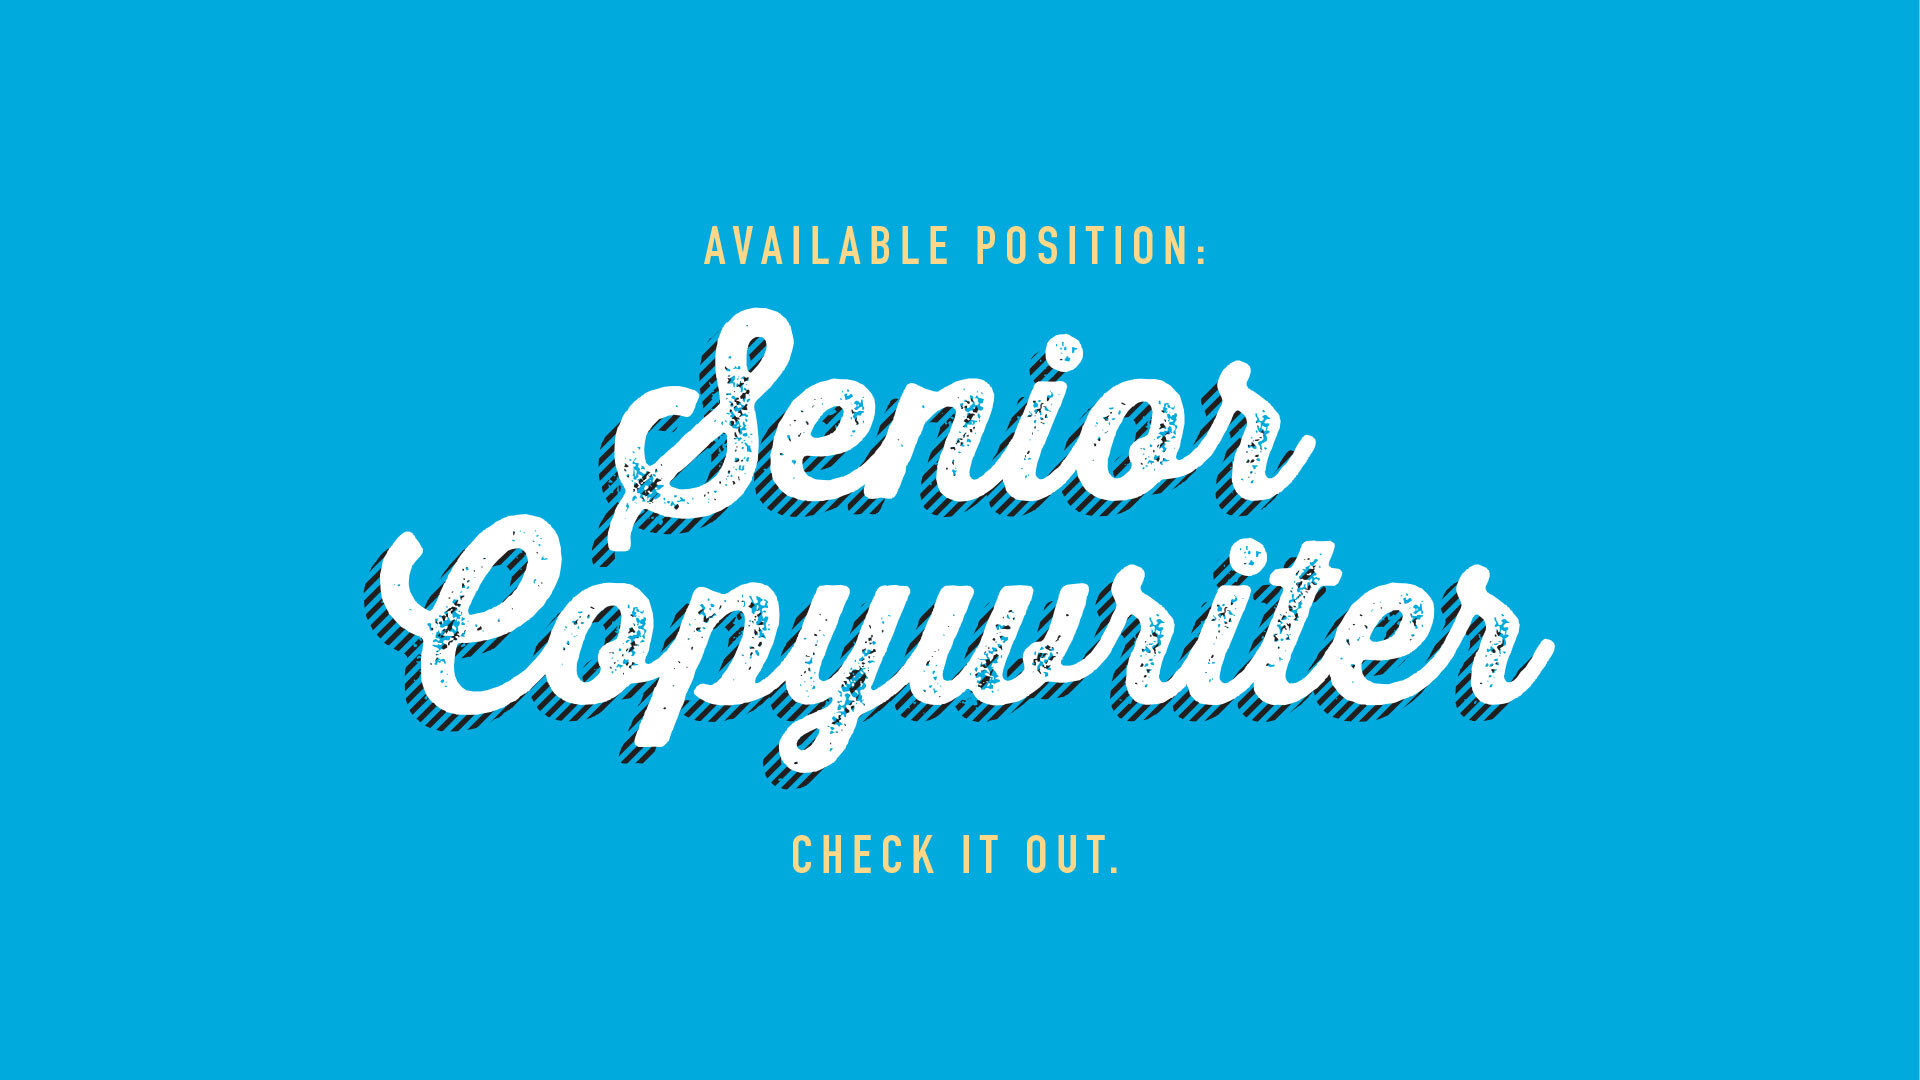 Available Position: Senior Copywriter. Check it out.